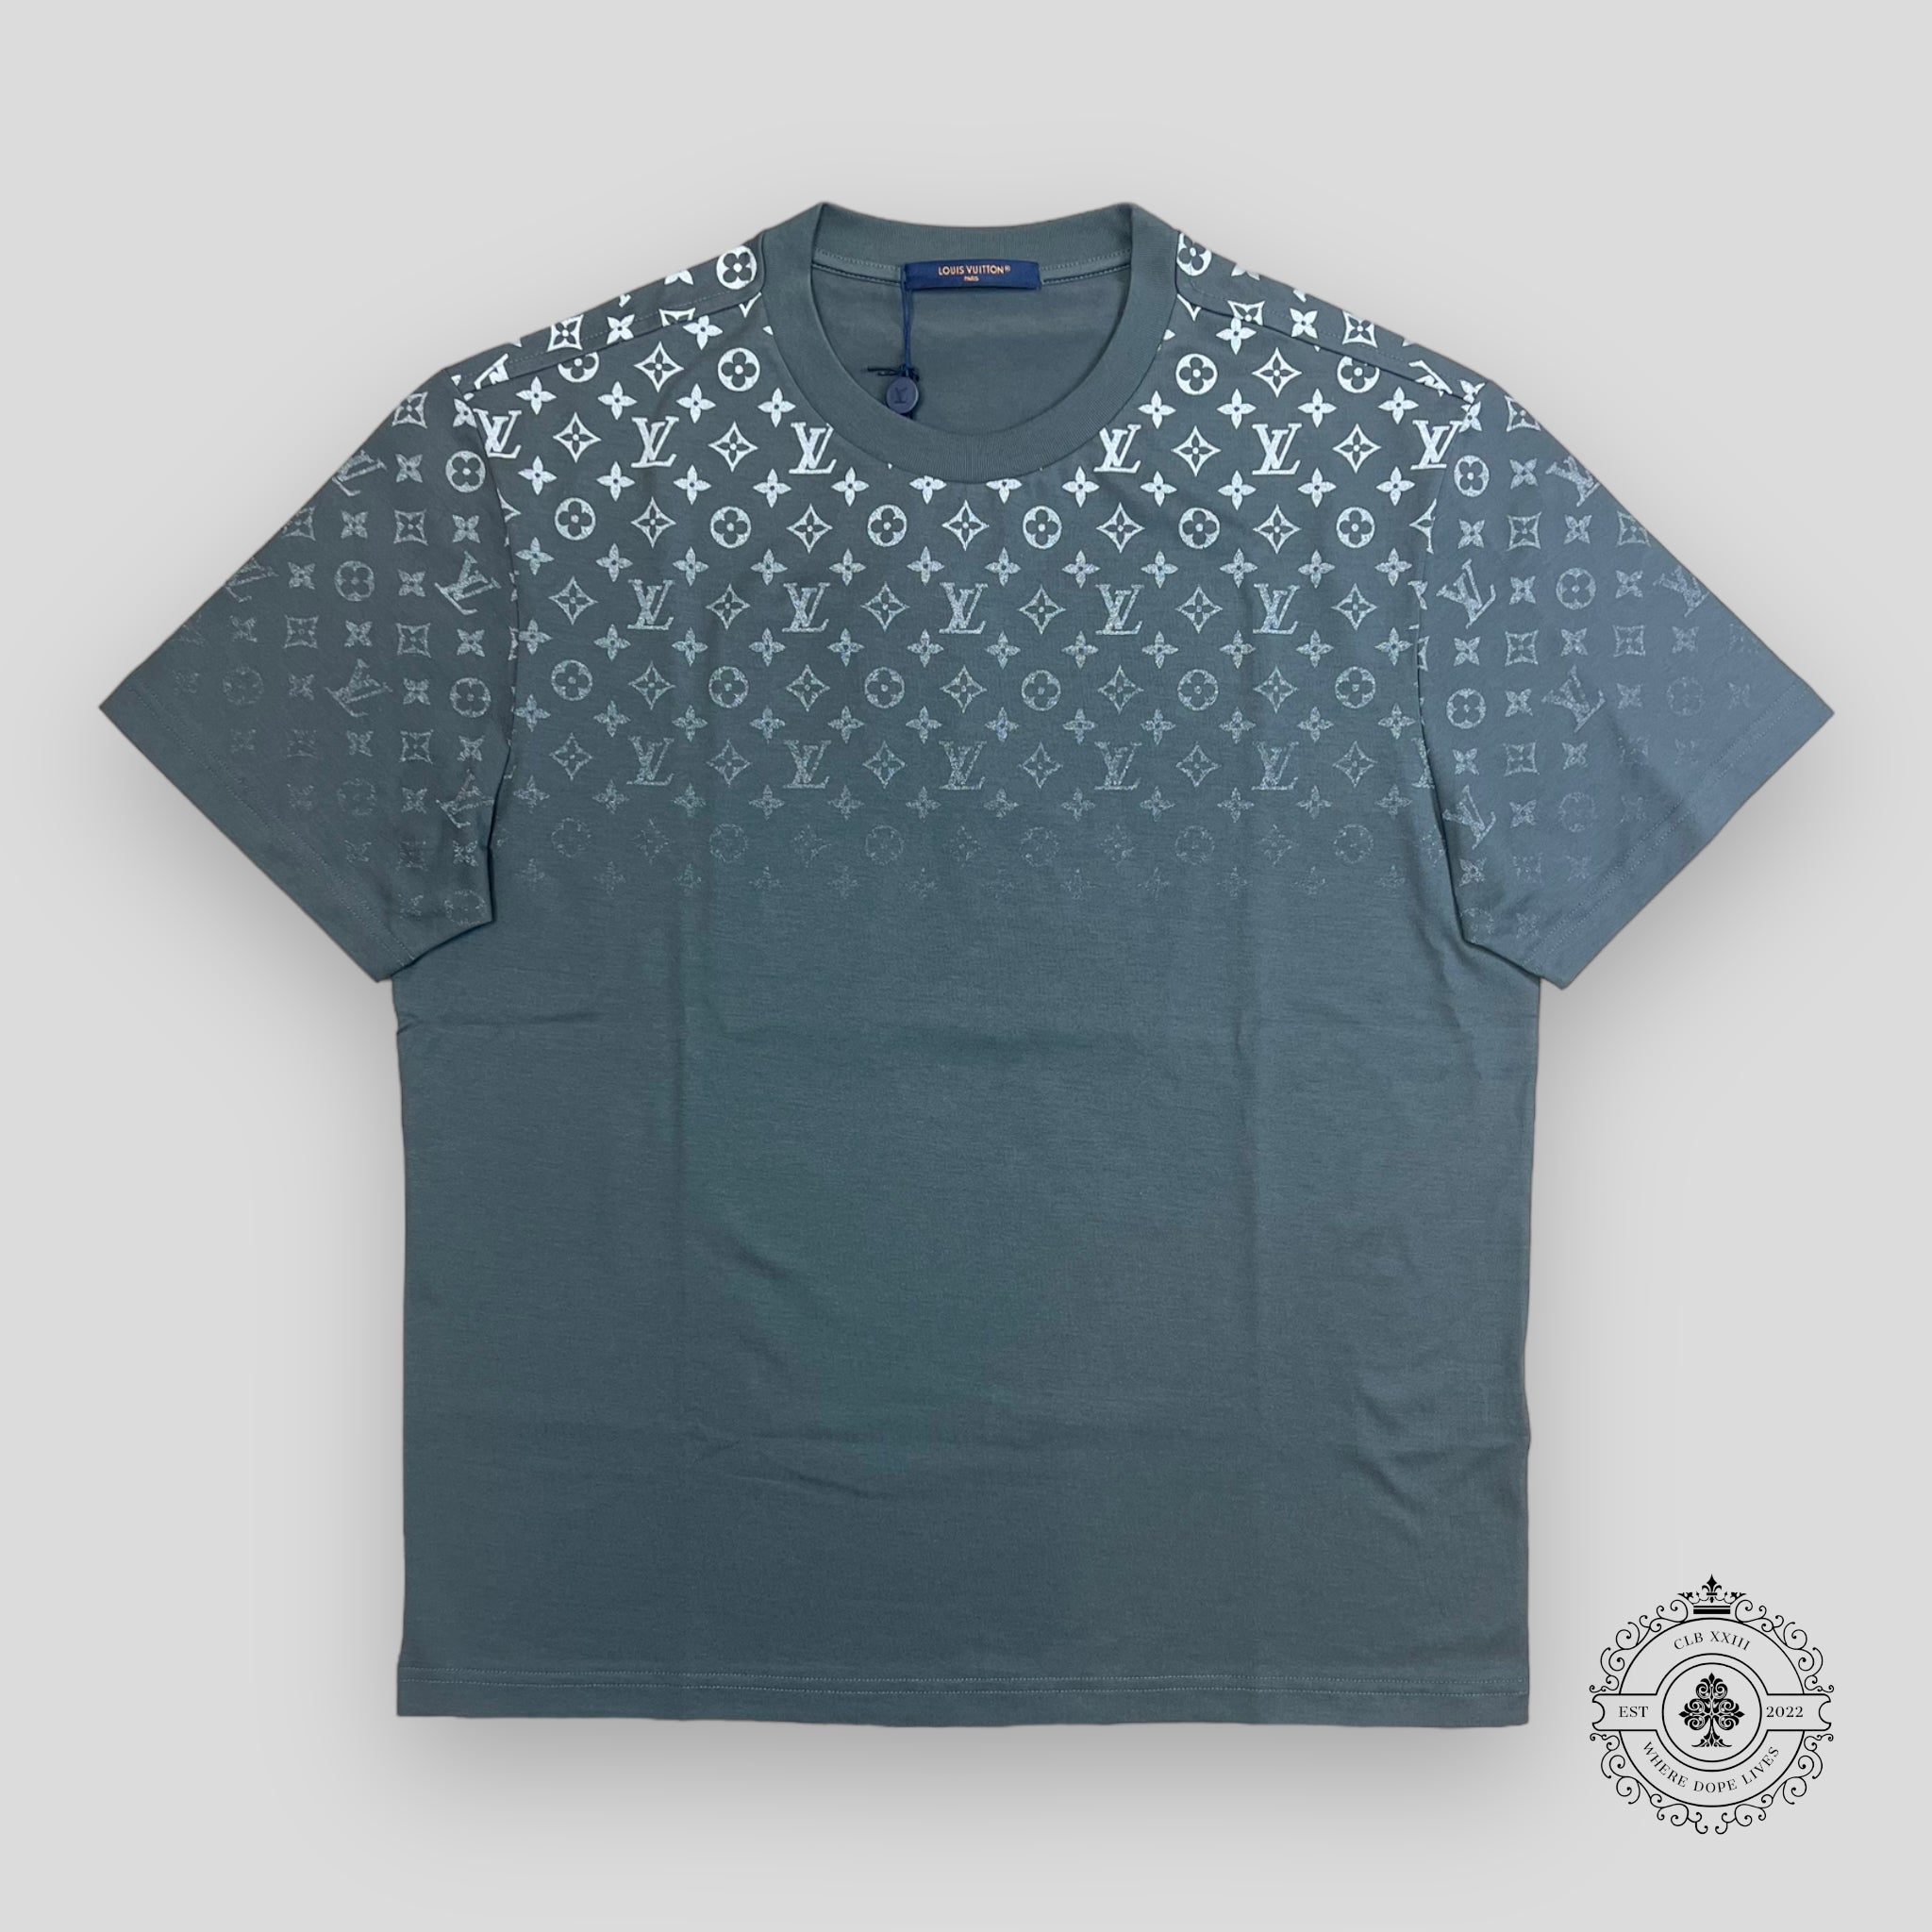 ORDER] LV FREQUENCY GRAPHIC T-SHIRT